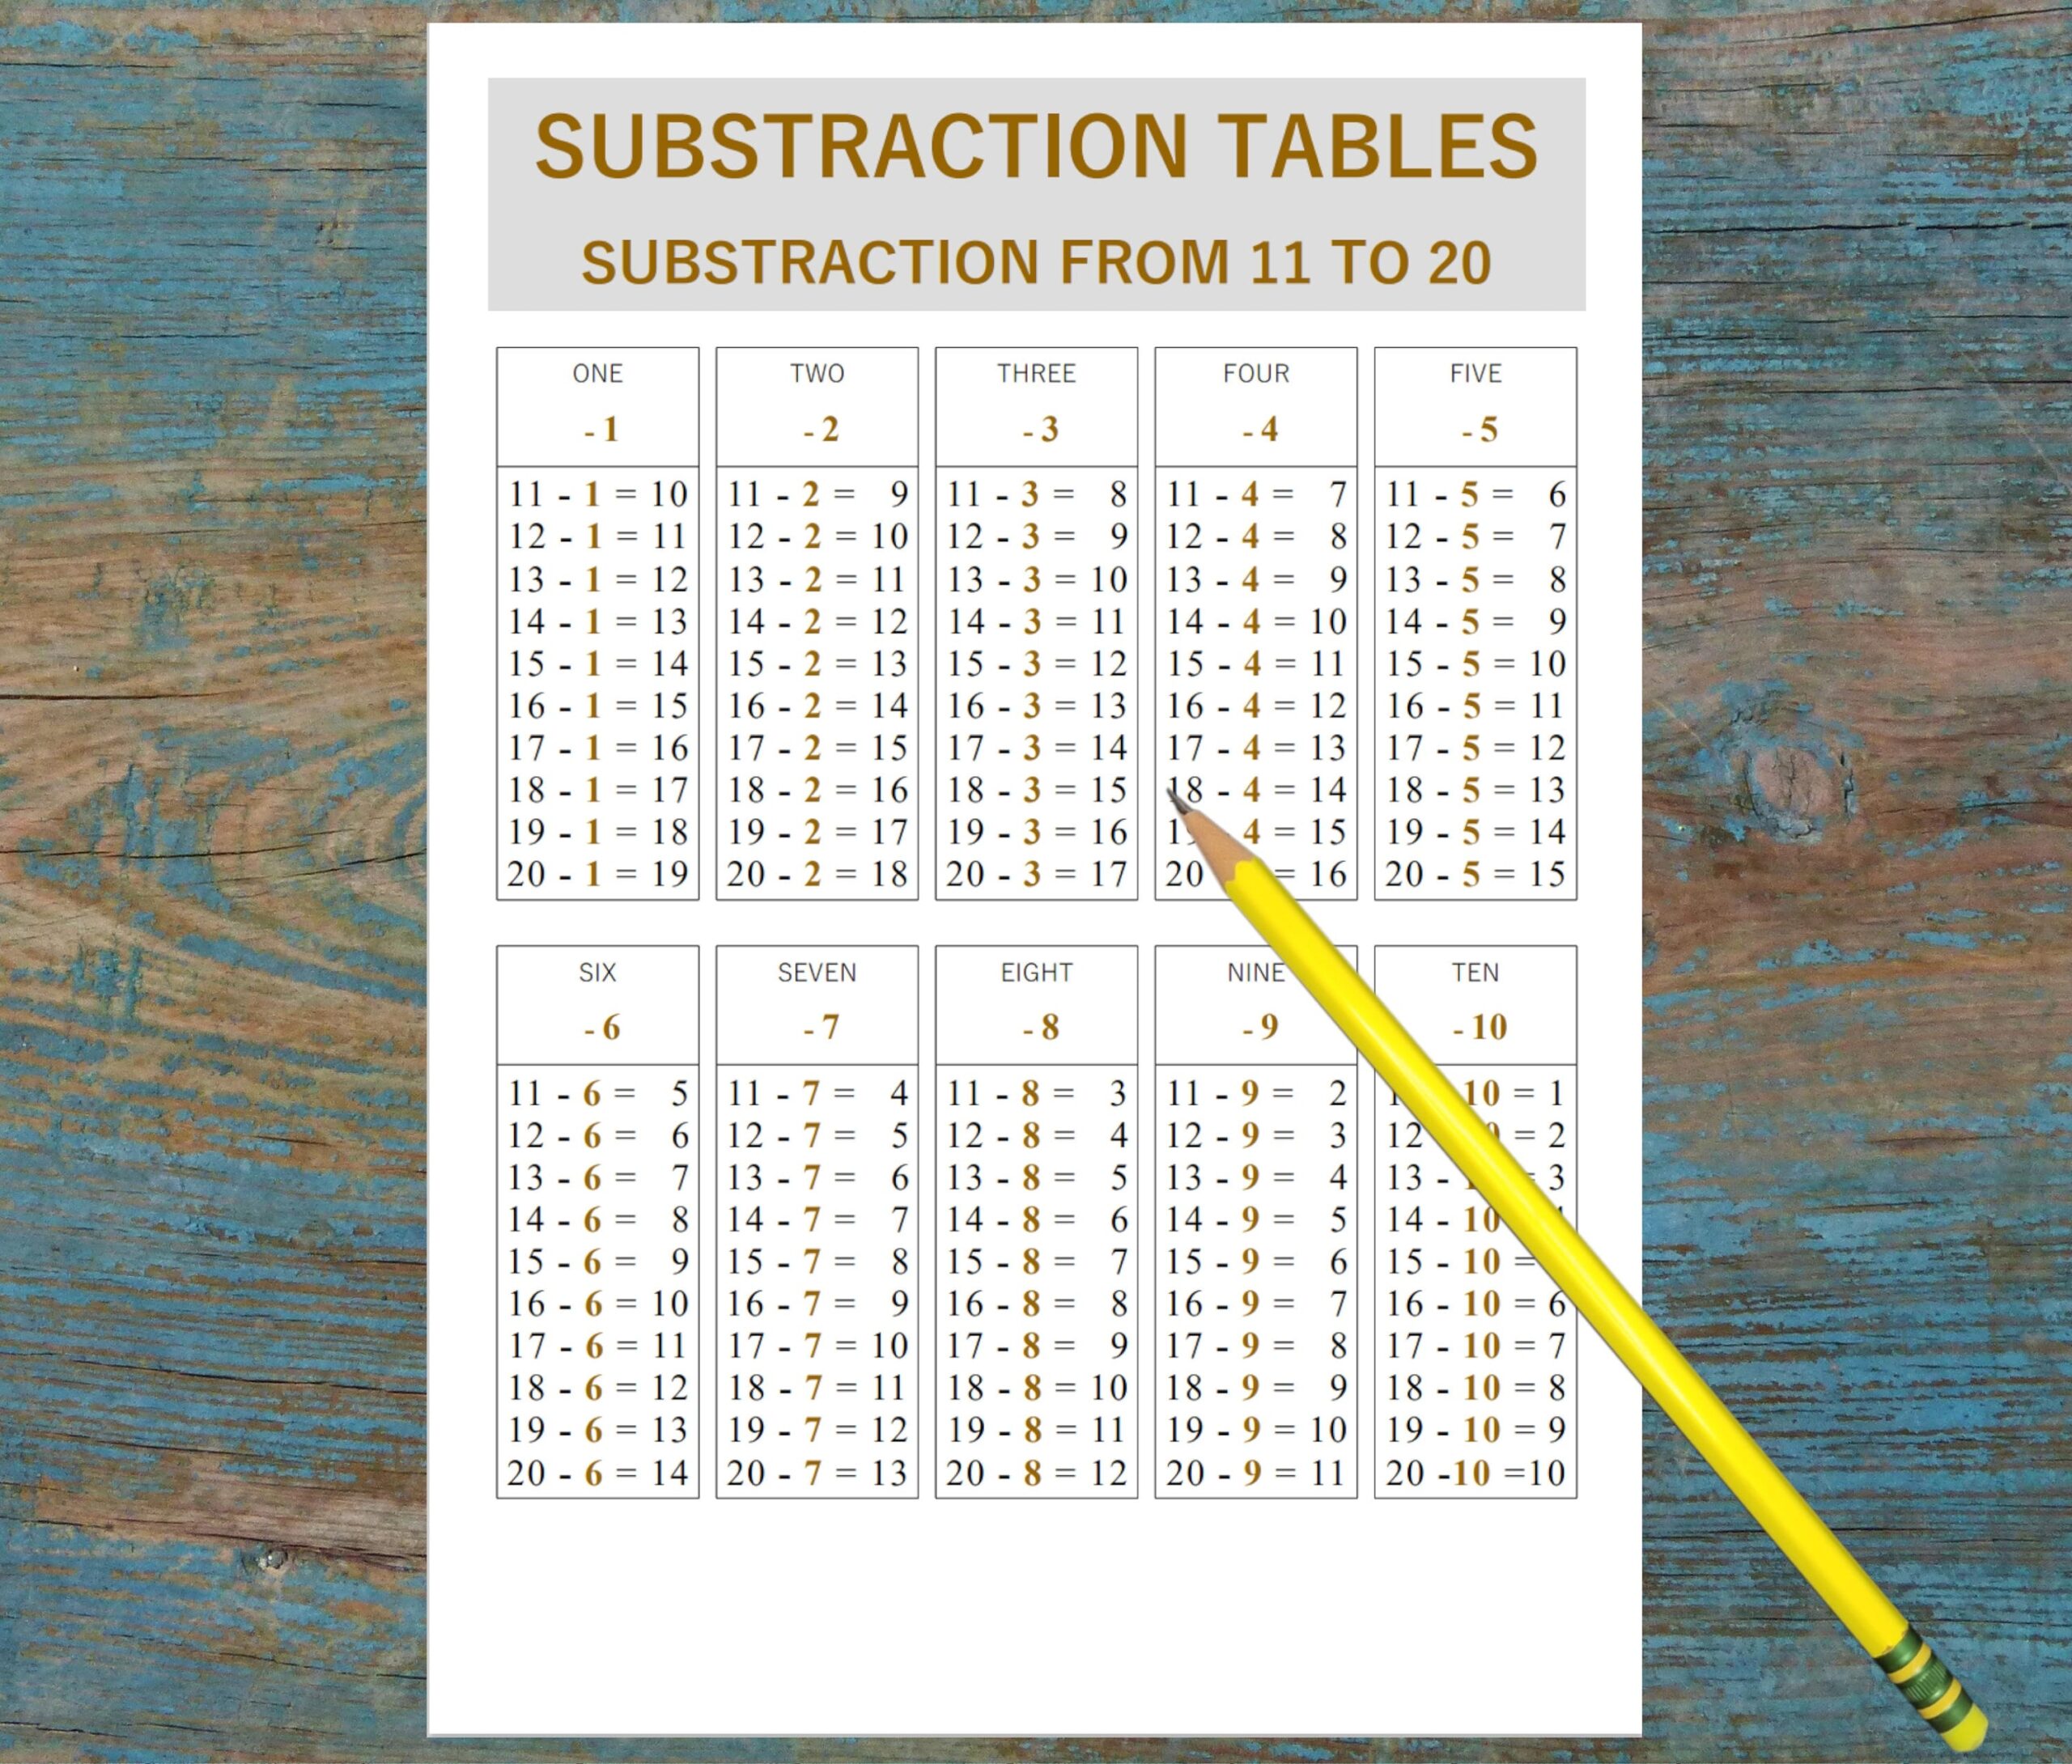 Subtraction Table Chart Numbers 10 To 20 Printable Elementary Math Sheet Educational Chart Homeschooling Learn Math Math Subtraction Etsy